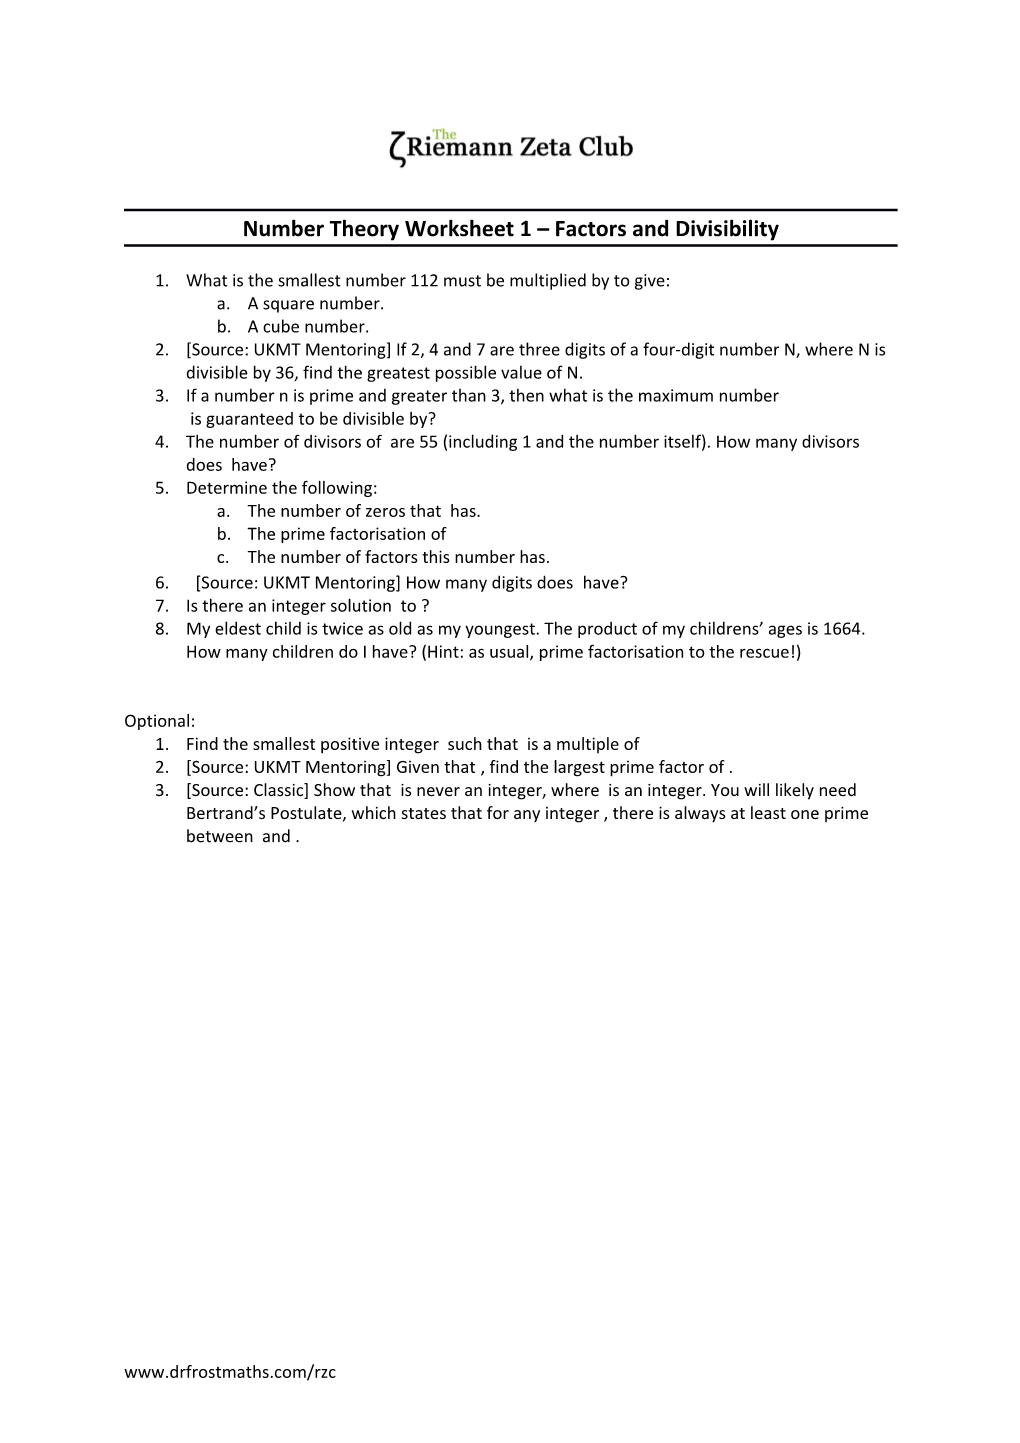 Number Theory Worksheet 1 Factors and Divisibility